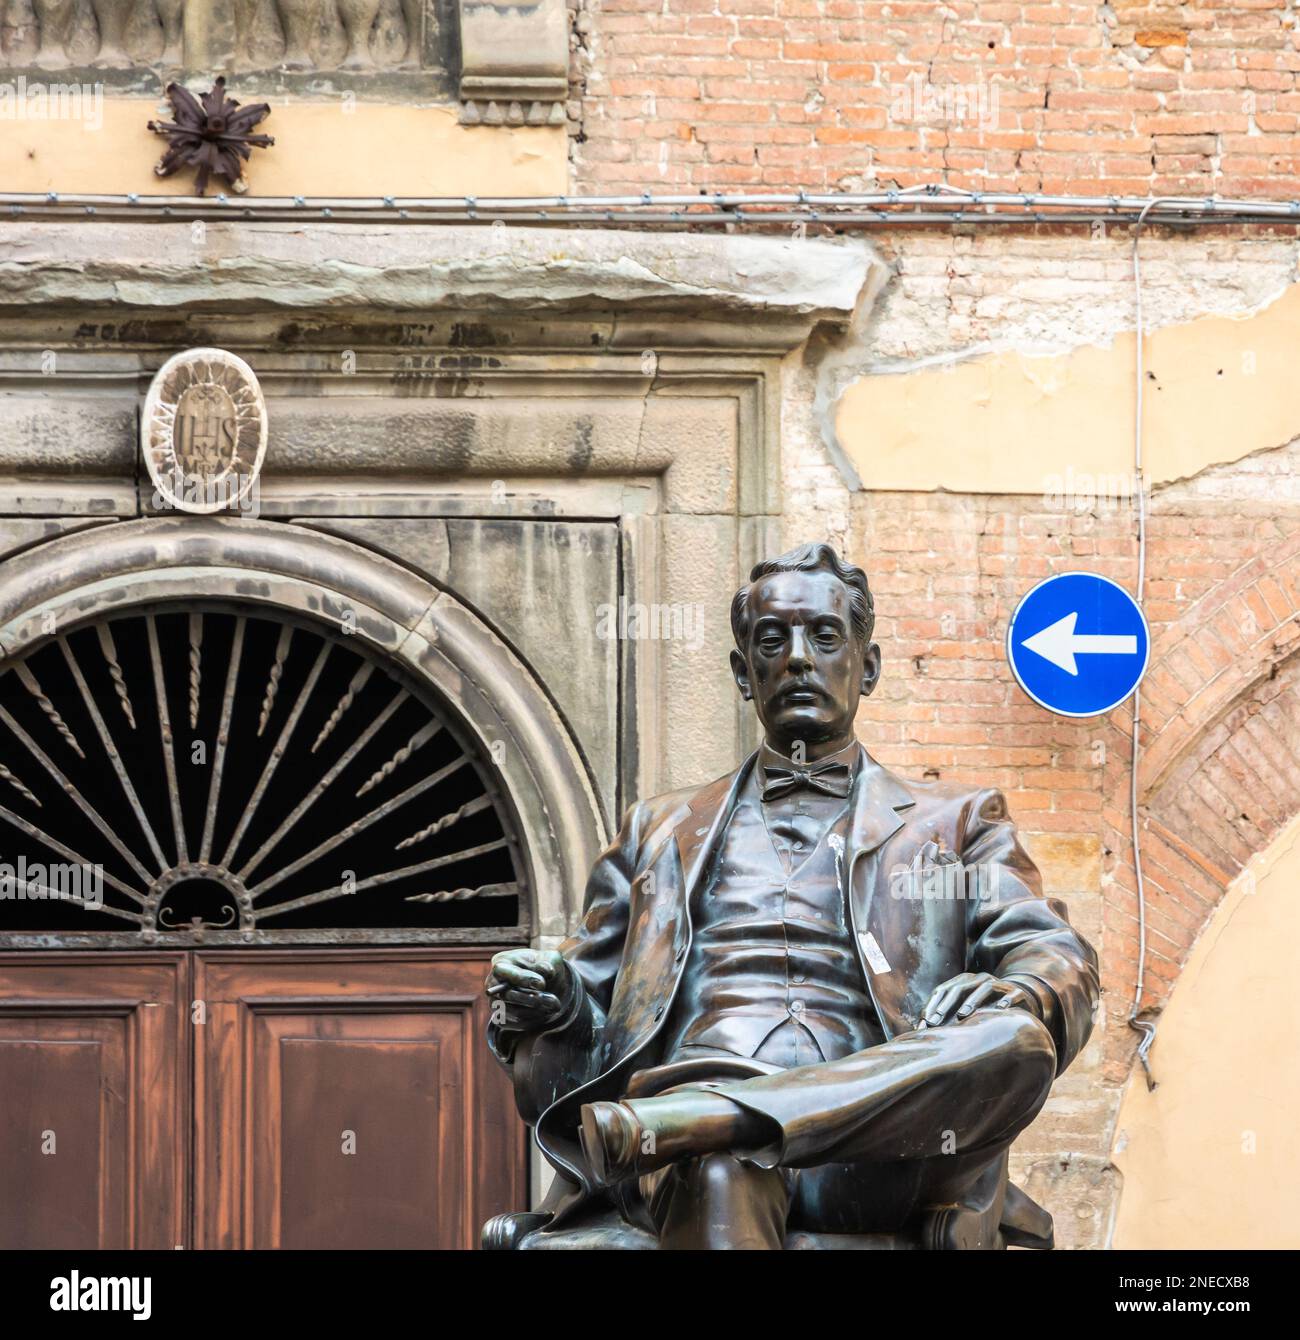 statue of the famous Italian composer Giacomo Puccini at the Cittadella square, Lucca town in Tuscany, central Italy, Europe Stock Photo